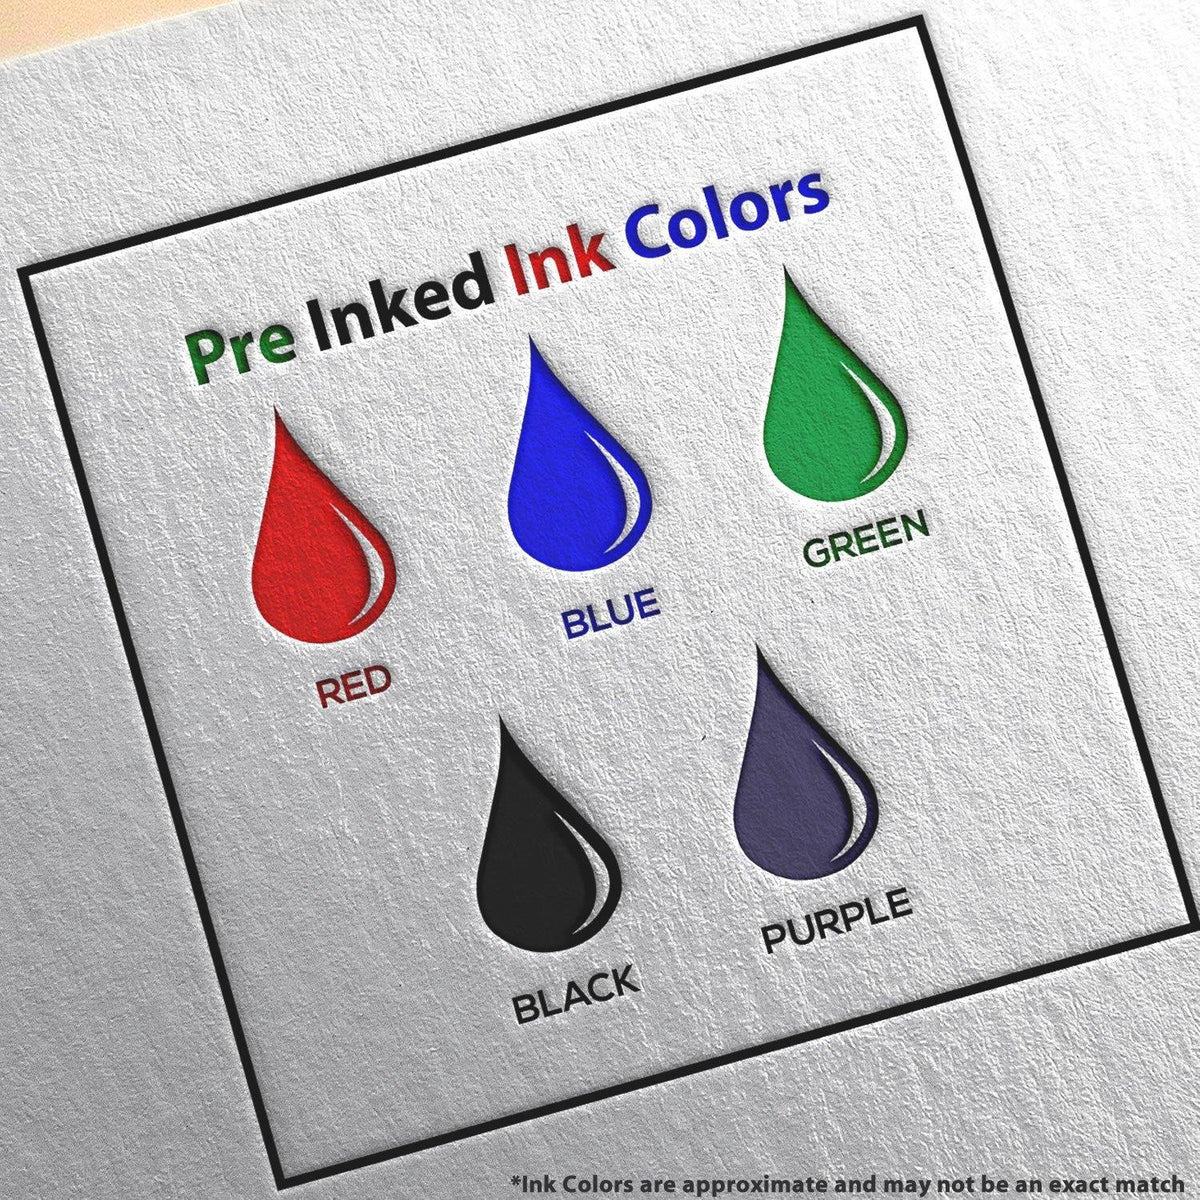 Large Pre Inked Parent Signature Required Stamp Ink Color Options